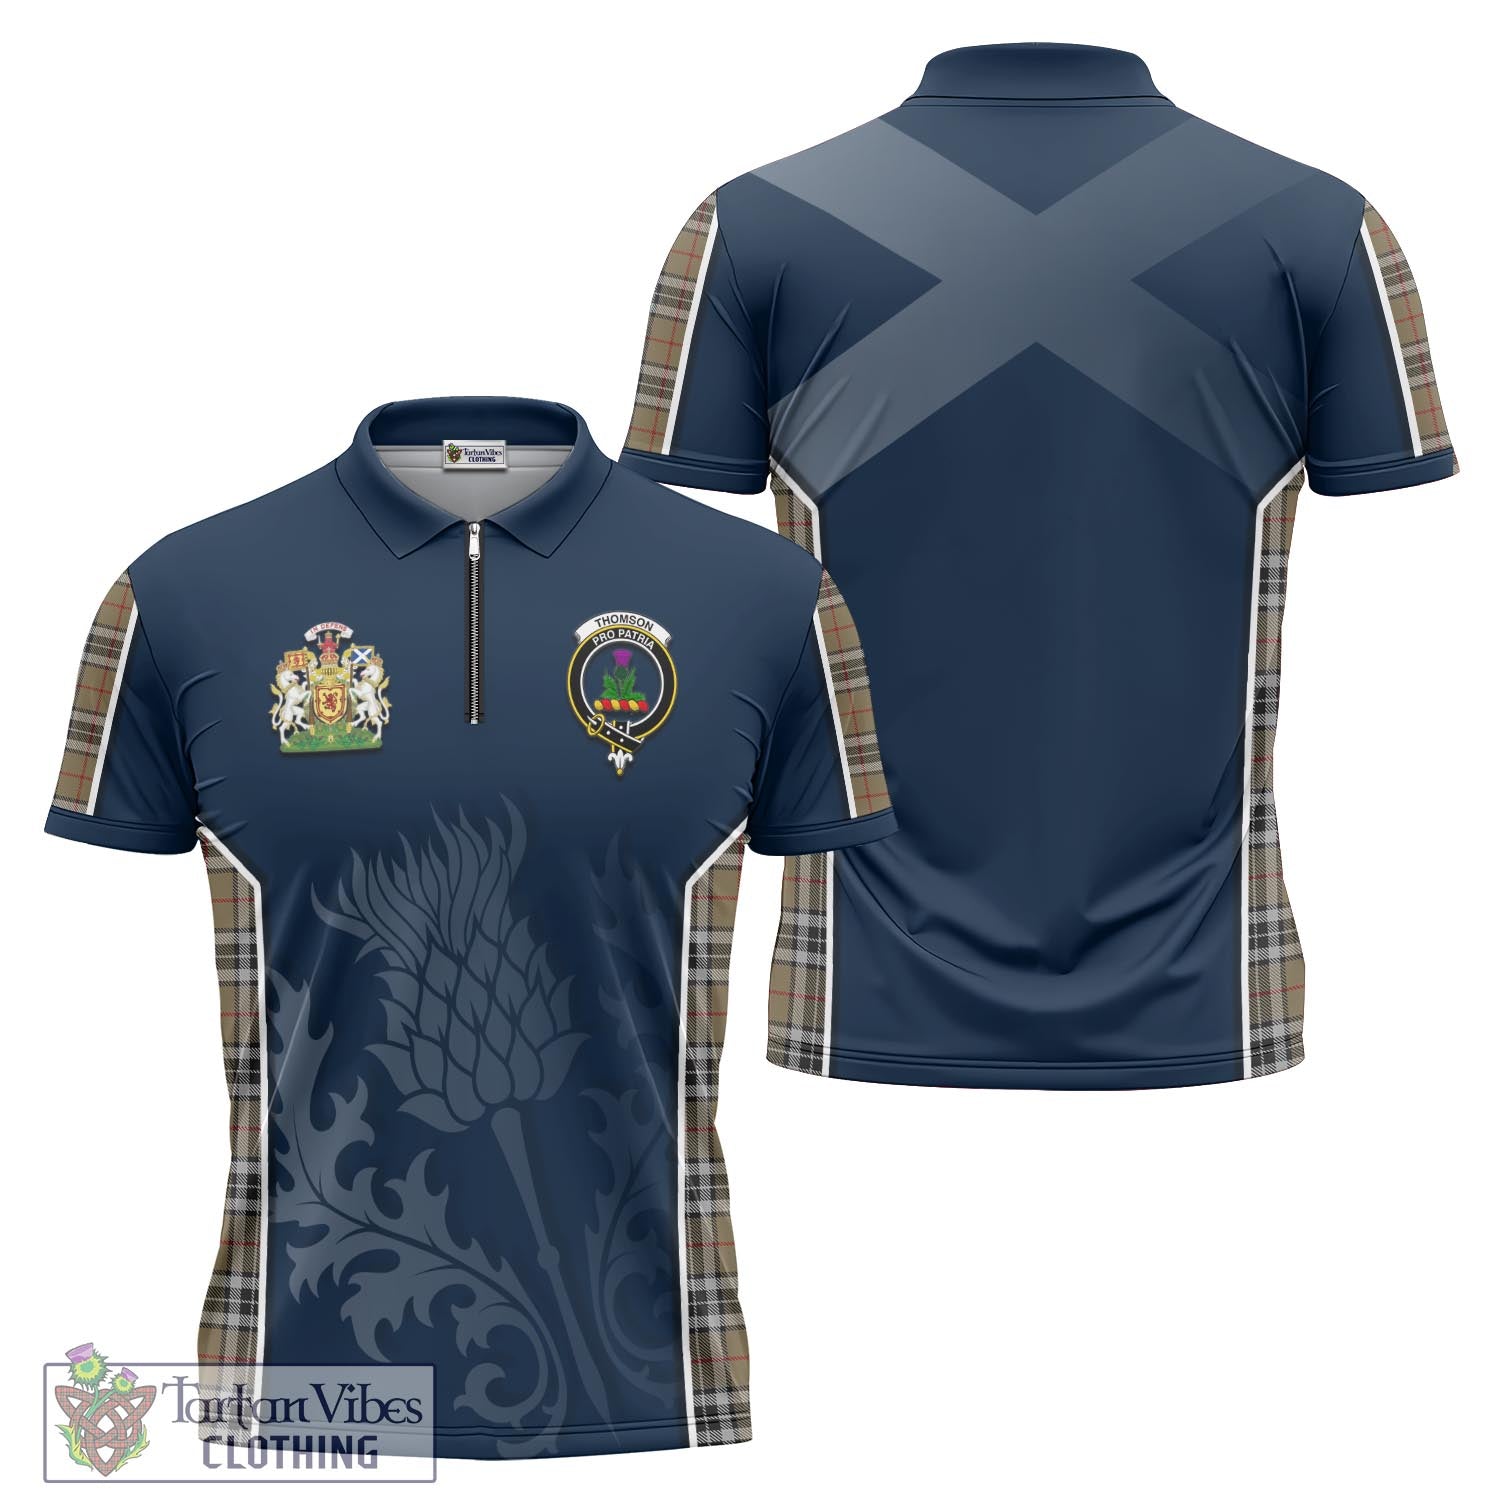 Tartan Vibes Clothing Thomson Camel Tartan Zipper Polo Shirt with Family Crest and Scottish Thistle Vibes Sport Style